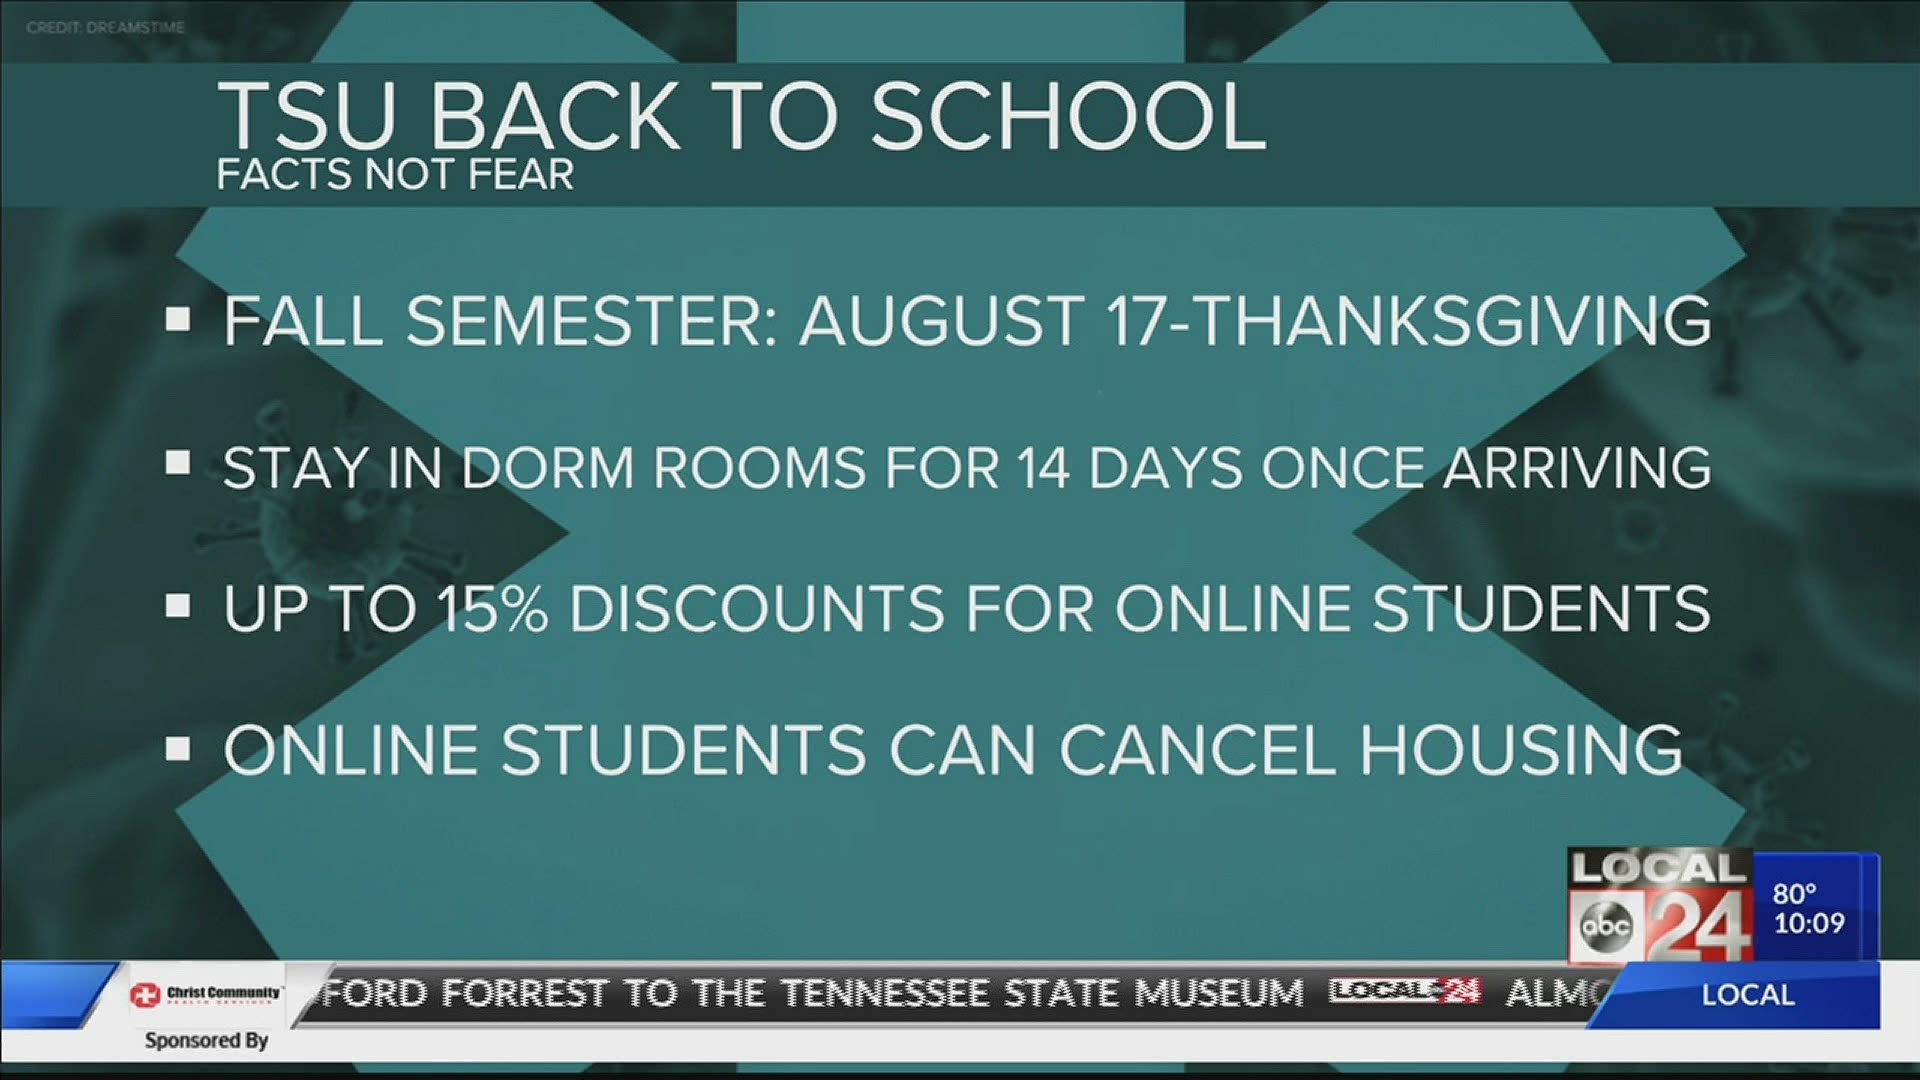 Tennessee State University has a plan that not only keeps its students safe, but will also help their wallets.